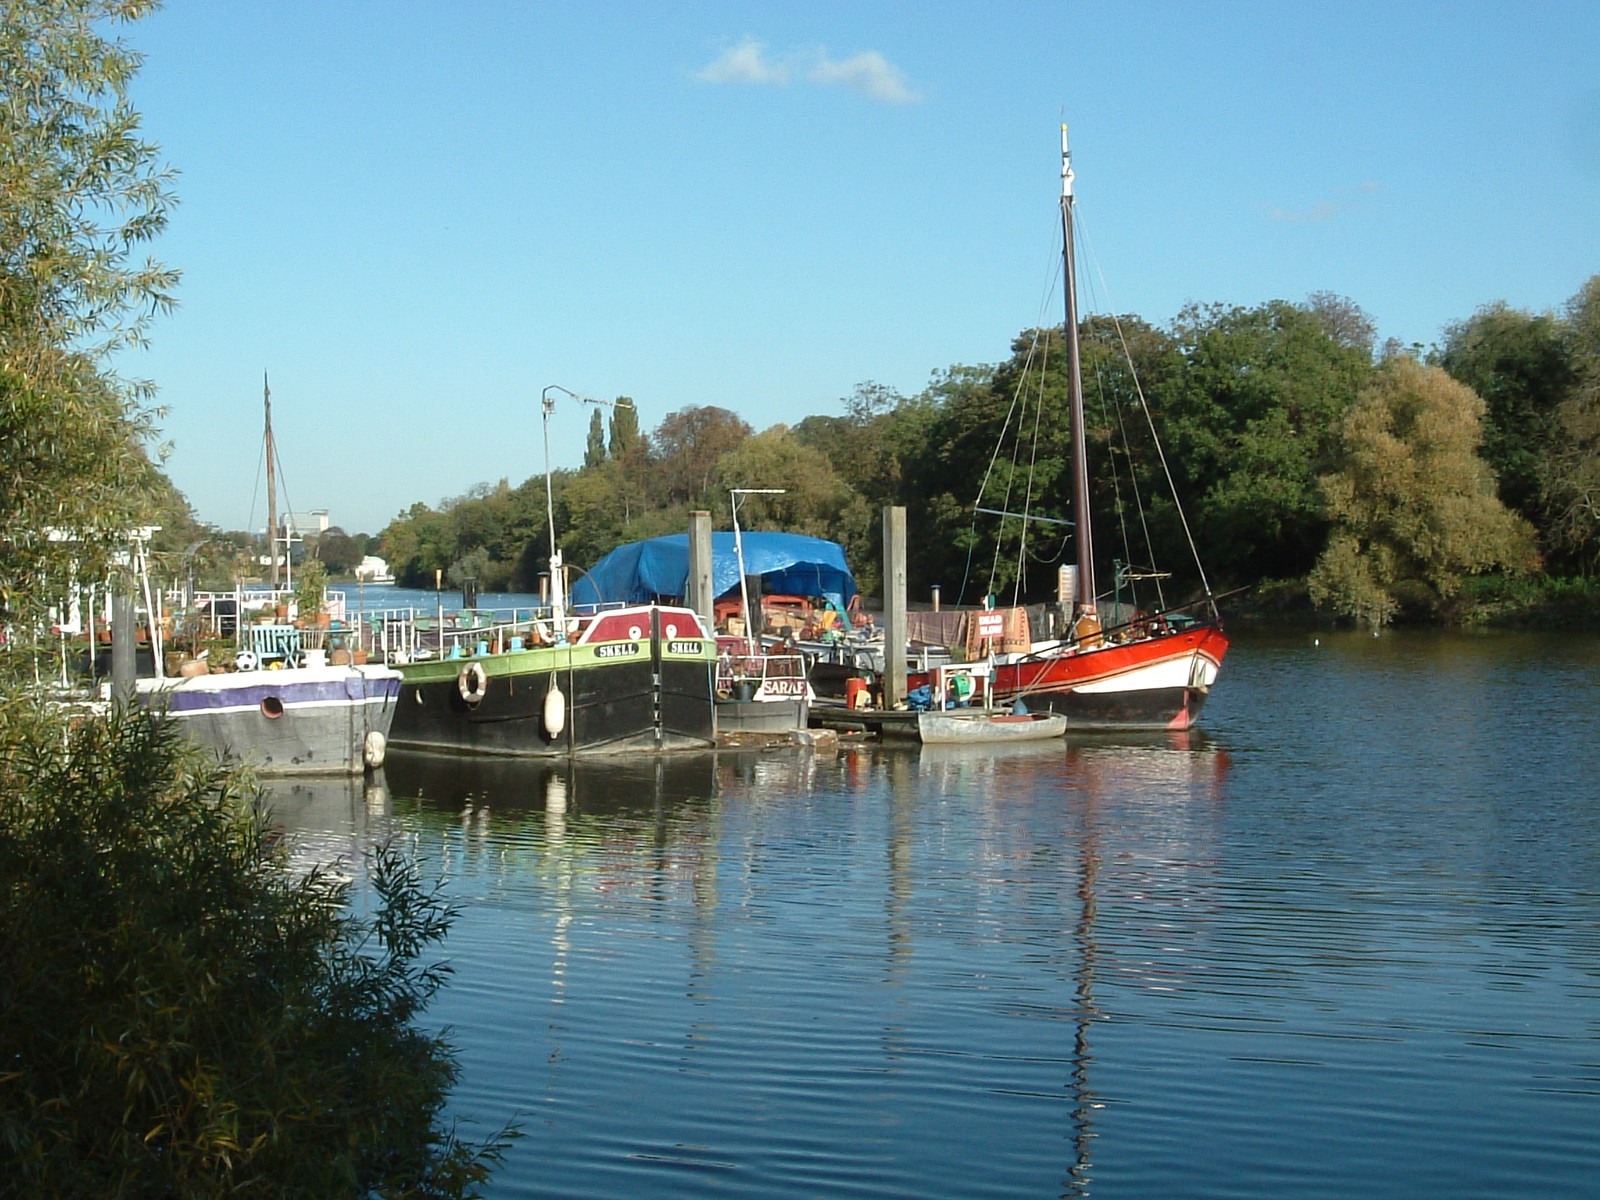 The houseboat mooring by Isleworth Ait